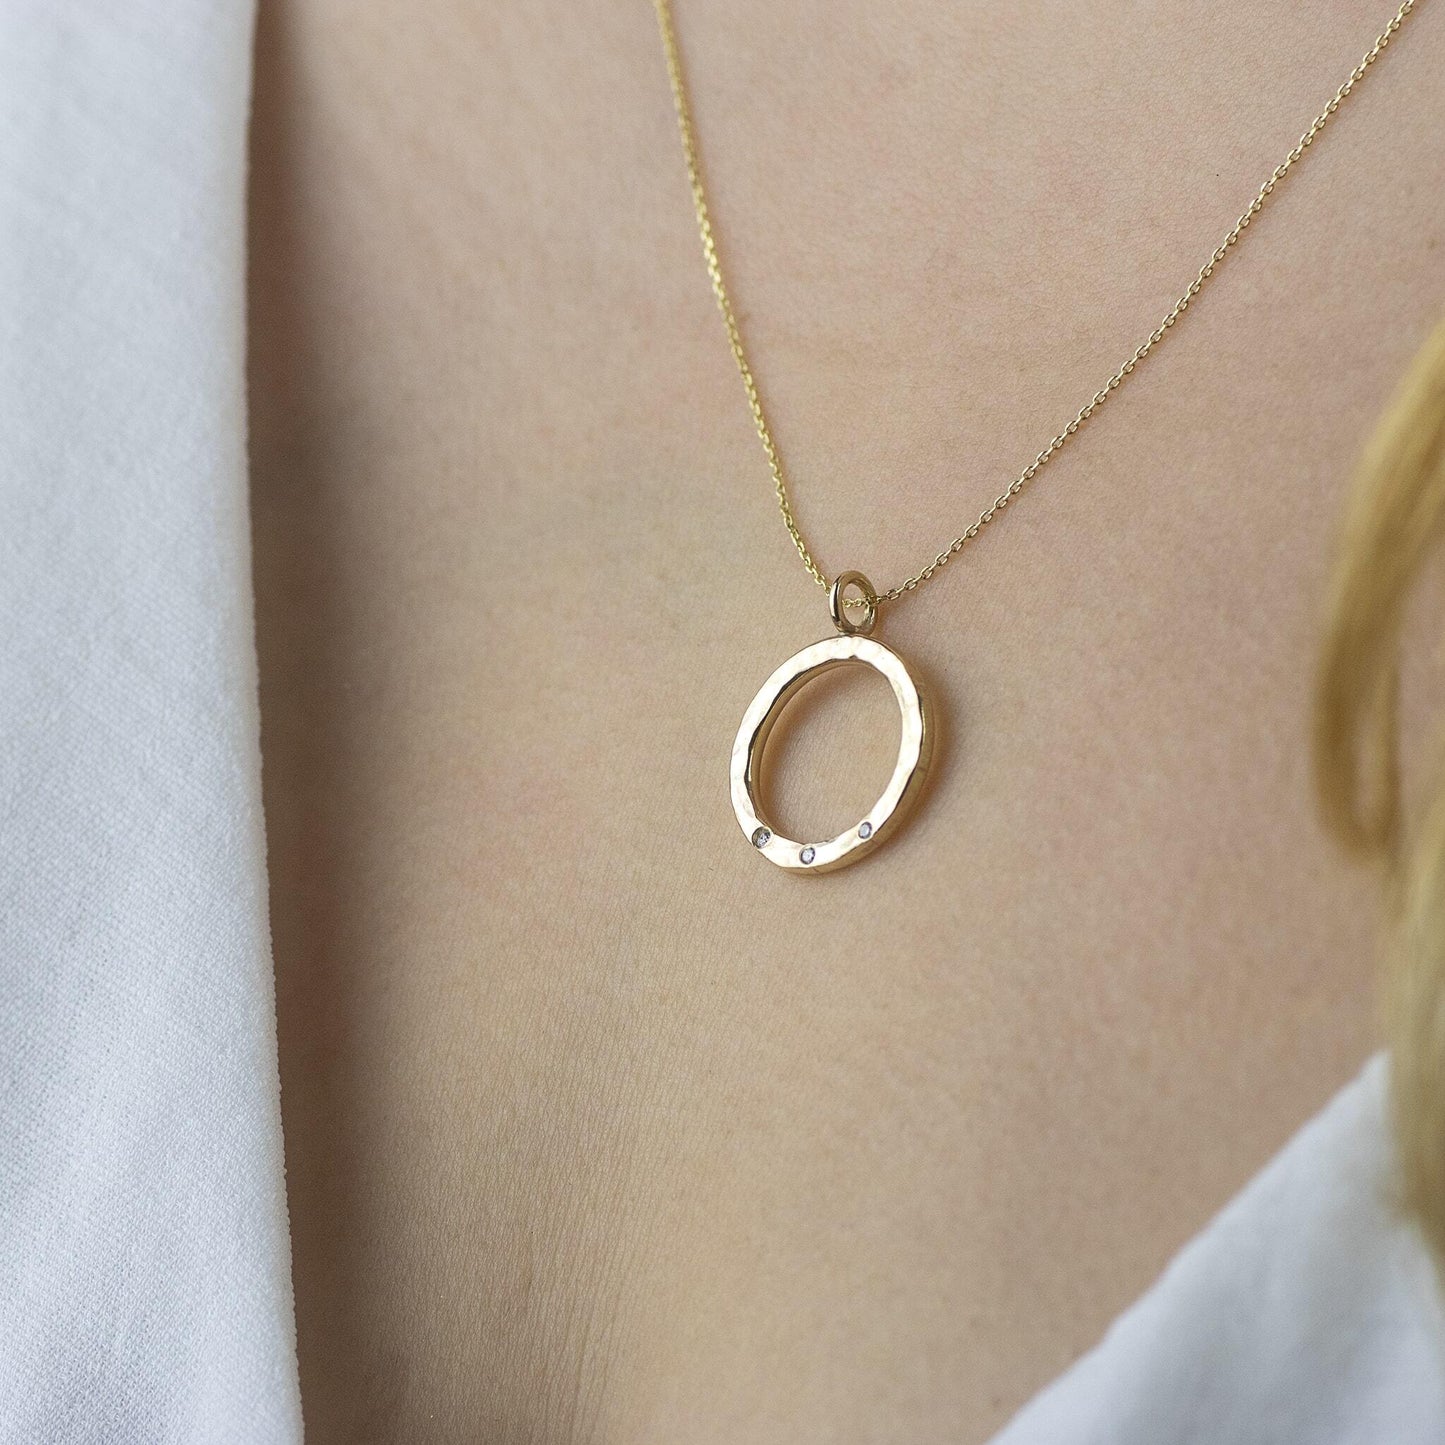 Mother's Day Gift - Recycled 9kt Gold Diamond Halo Necklace - 2 Diamonds for 2 Generations